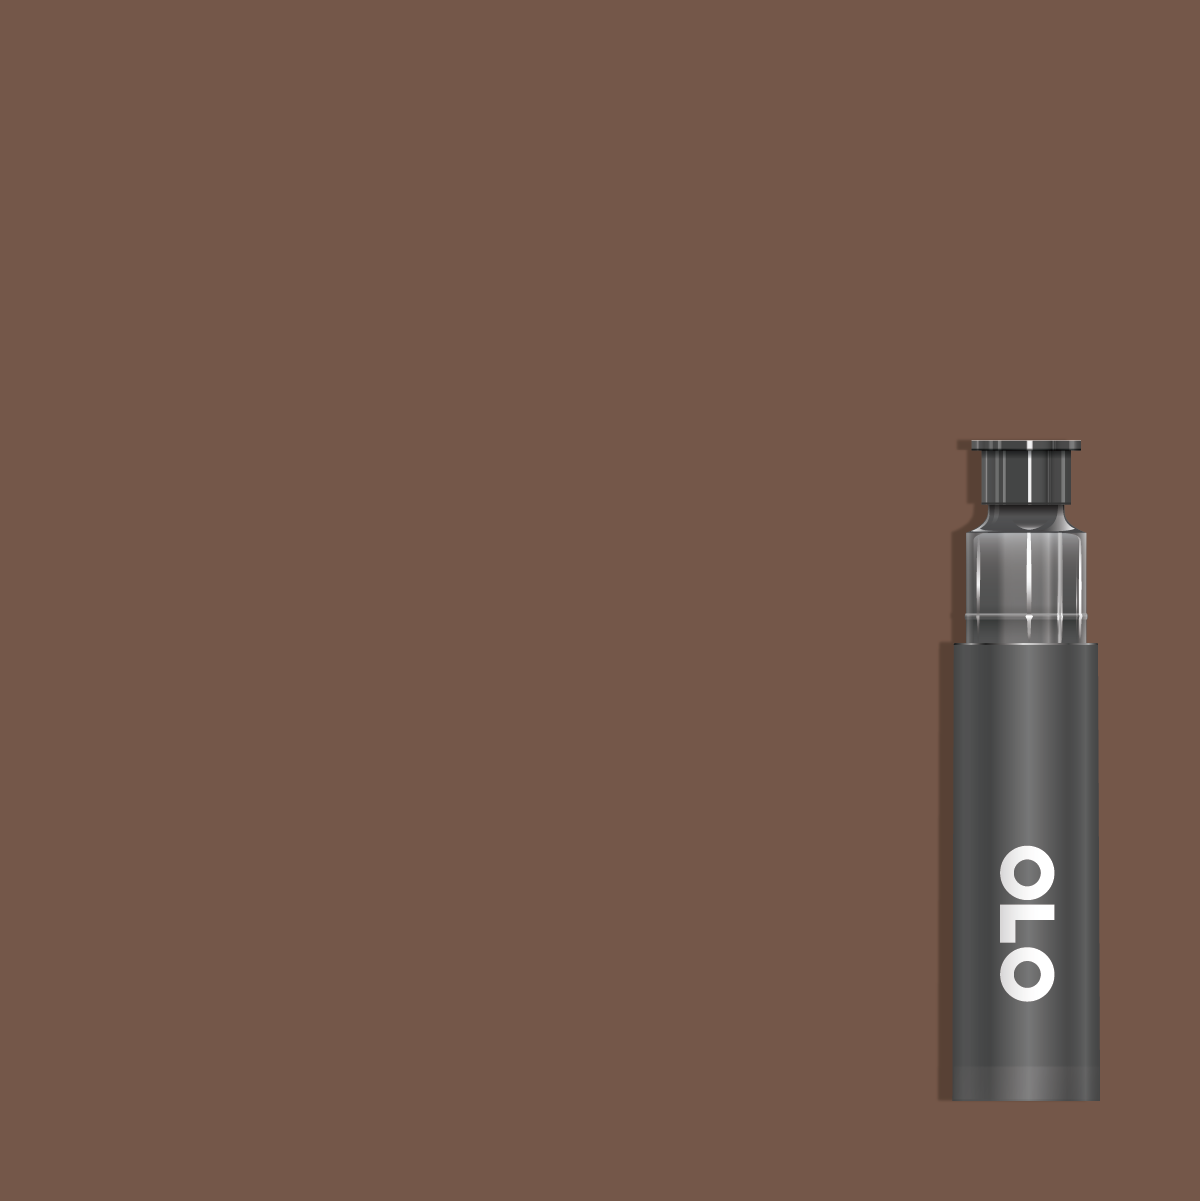 OLO OR7.6 Light Walnut Replacement Cartridge